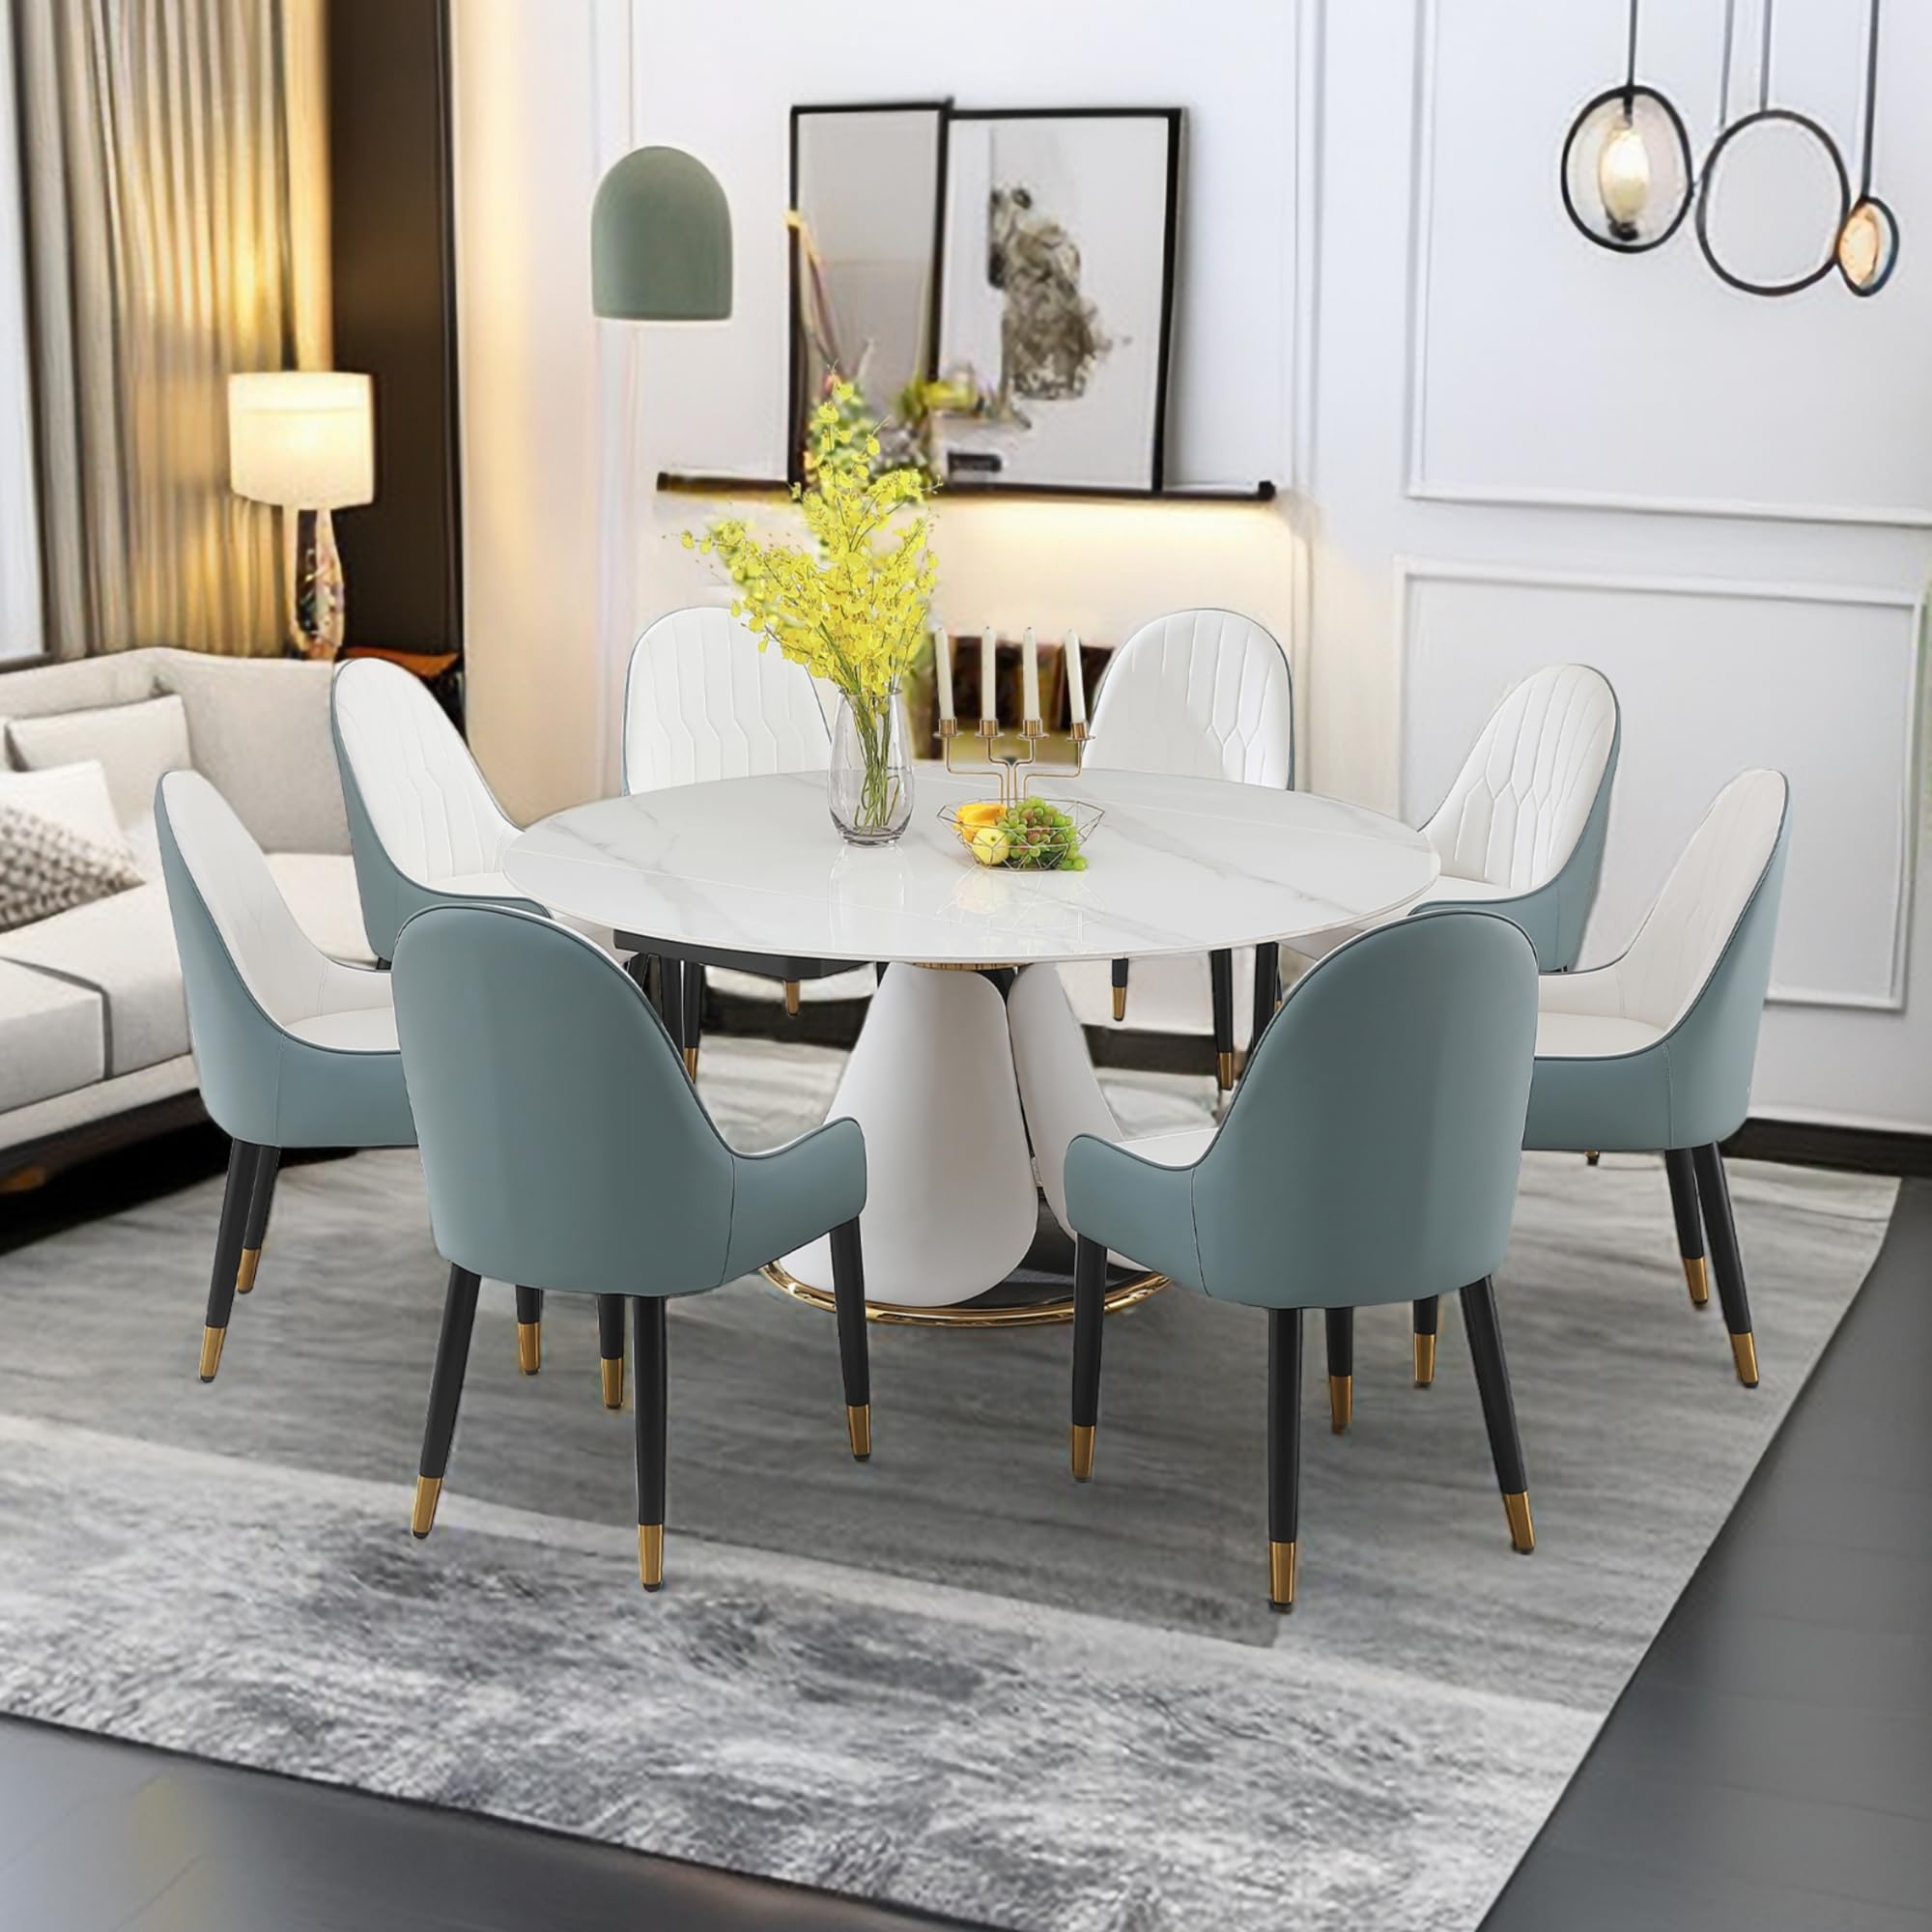 Montary Stylish Modern Sintered Stone Dining Table Multifunctional Simple Extending Dining Table Set of 6 PCS Blue Chairs